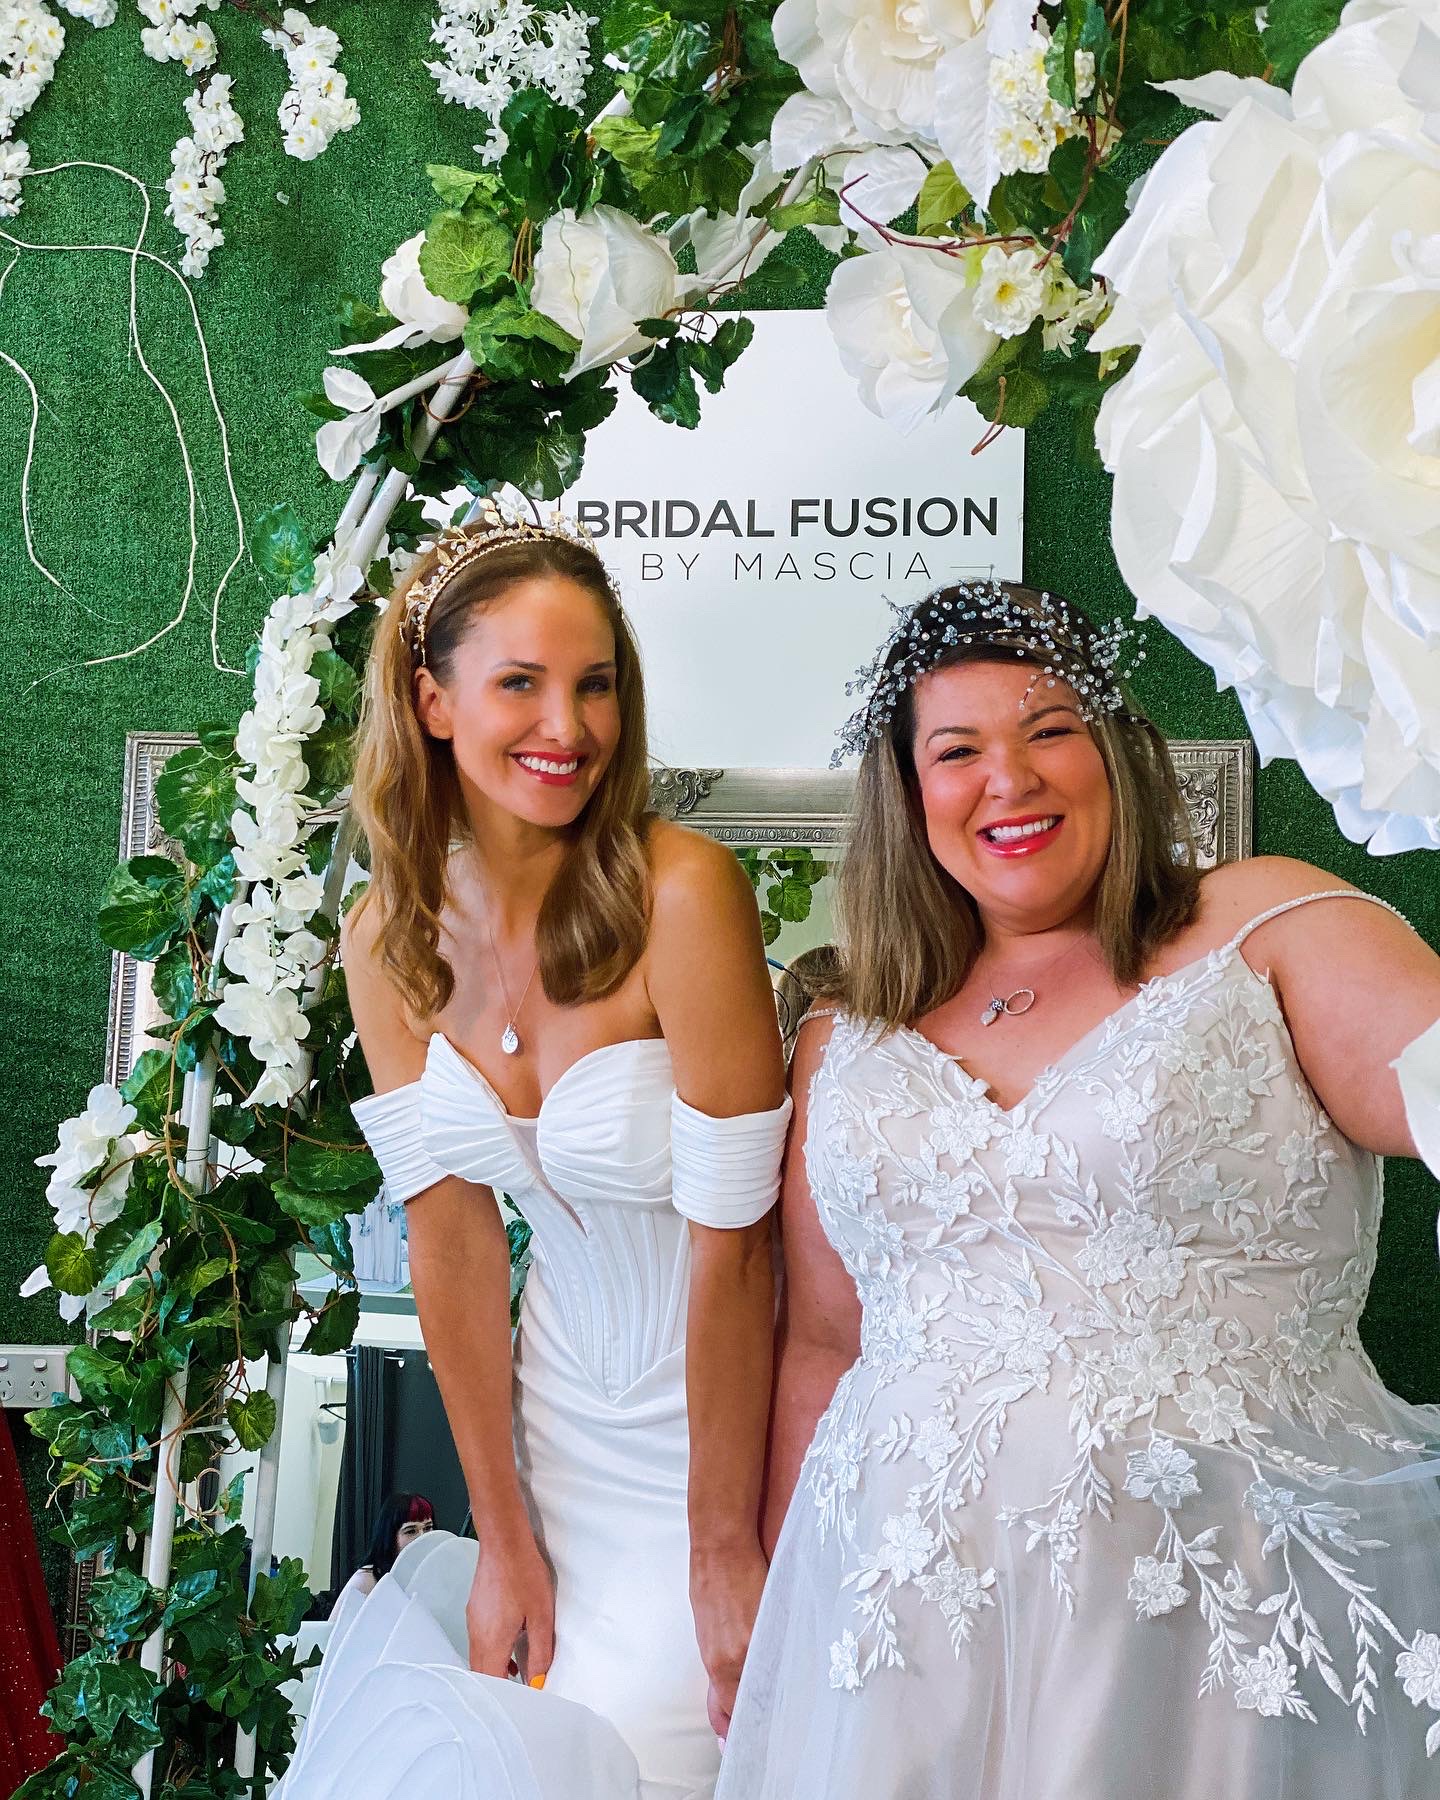 There’s no place like Bridal Fusion by Mascia